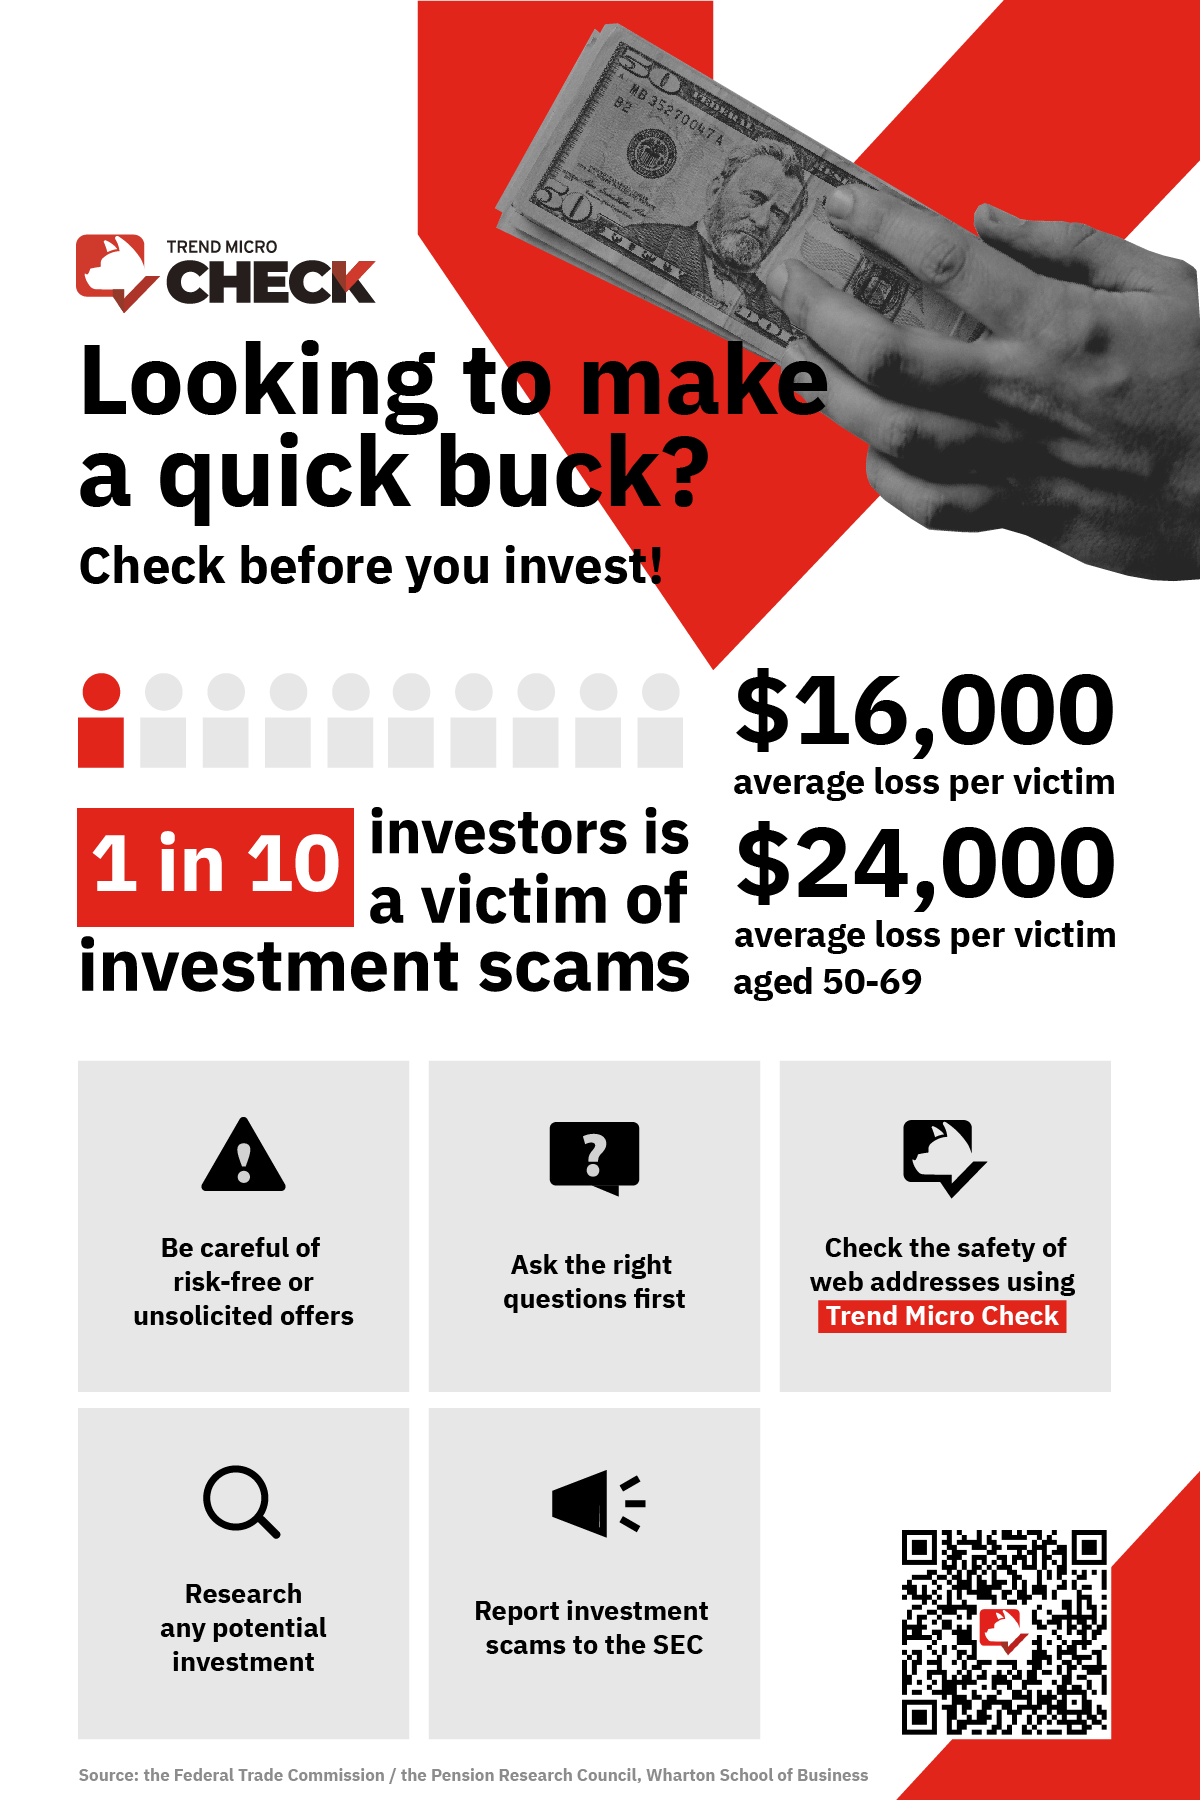 Looking to make a quick buck? Check before you invest!